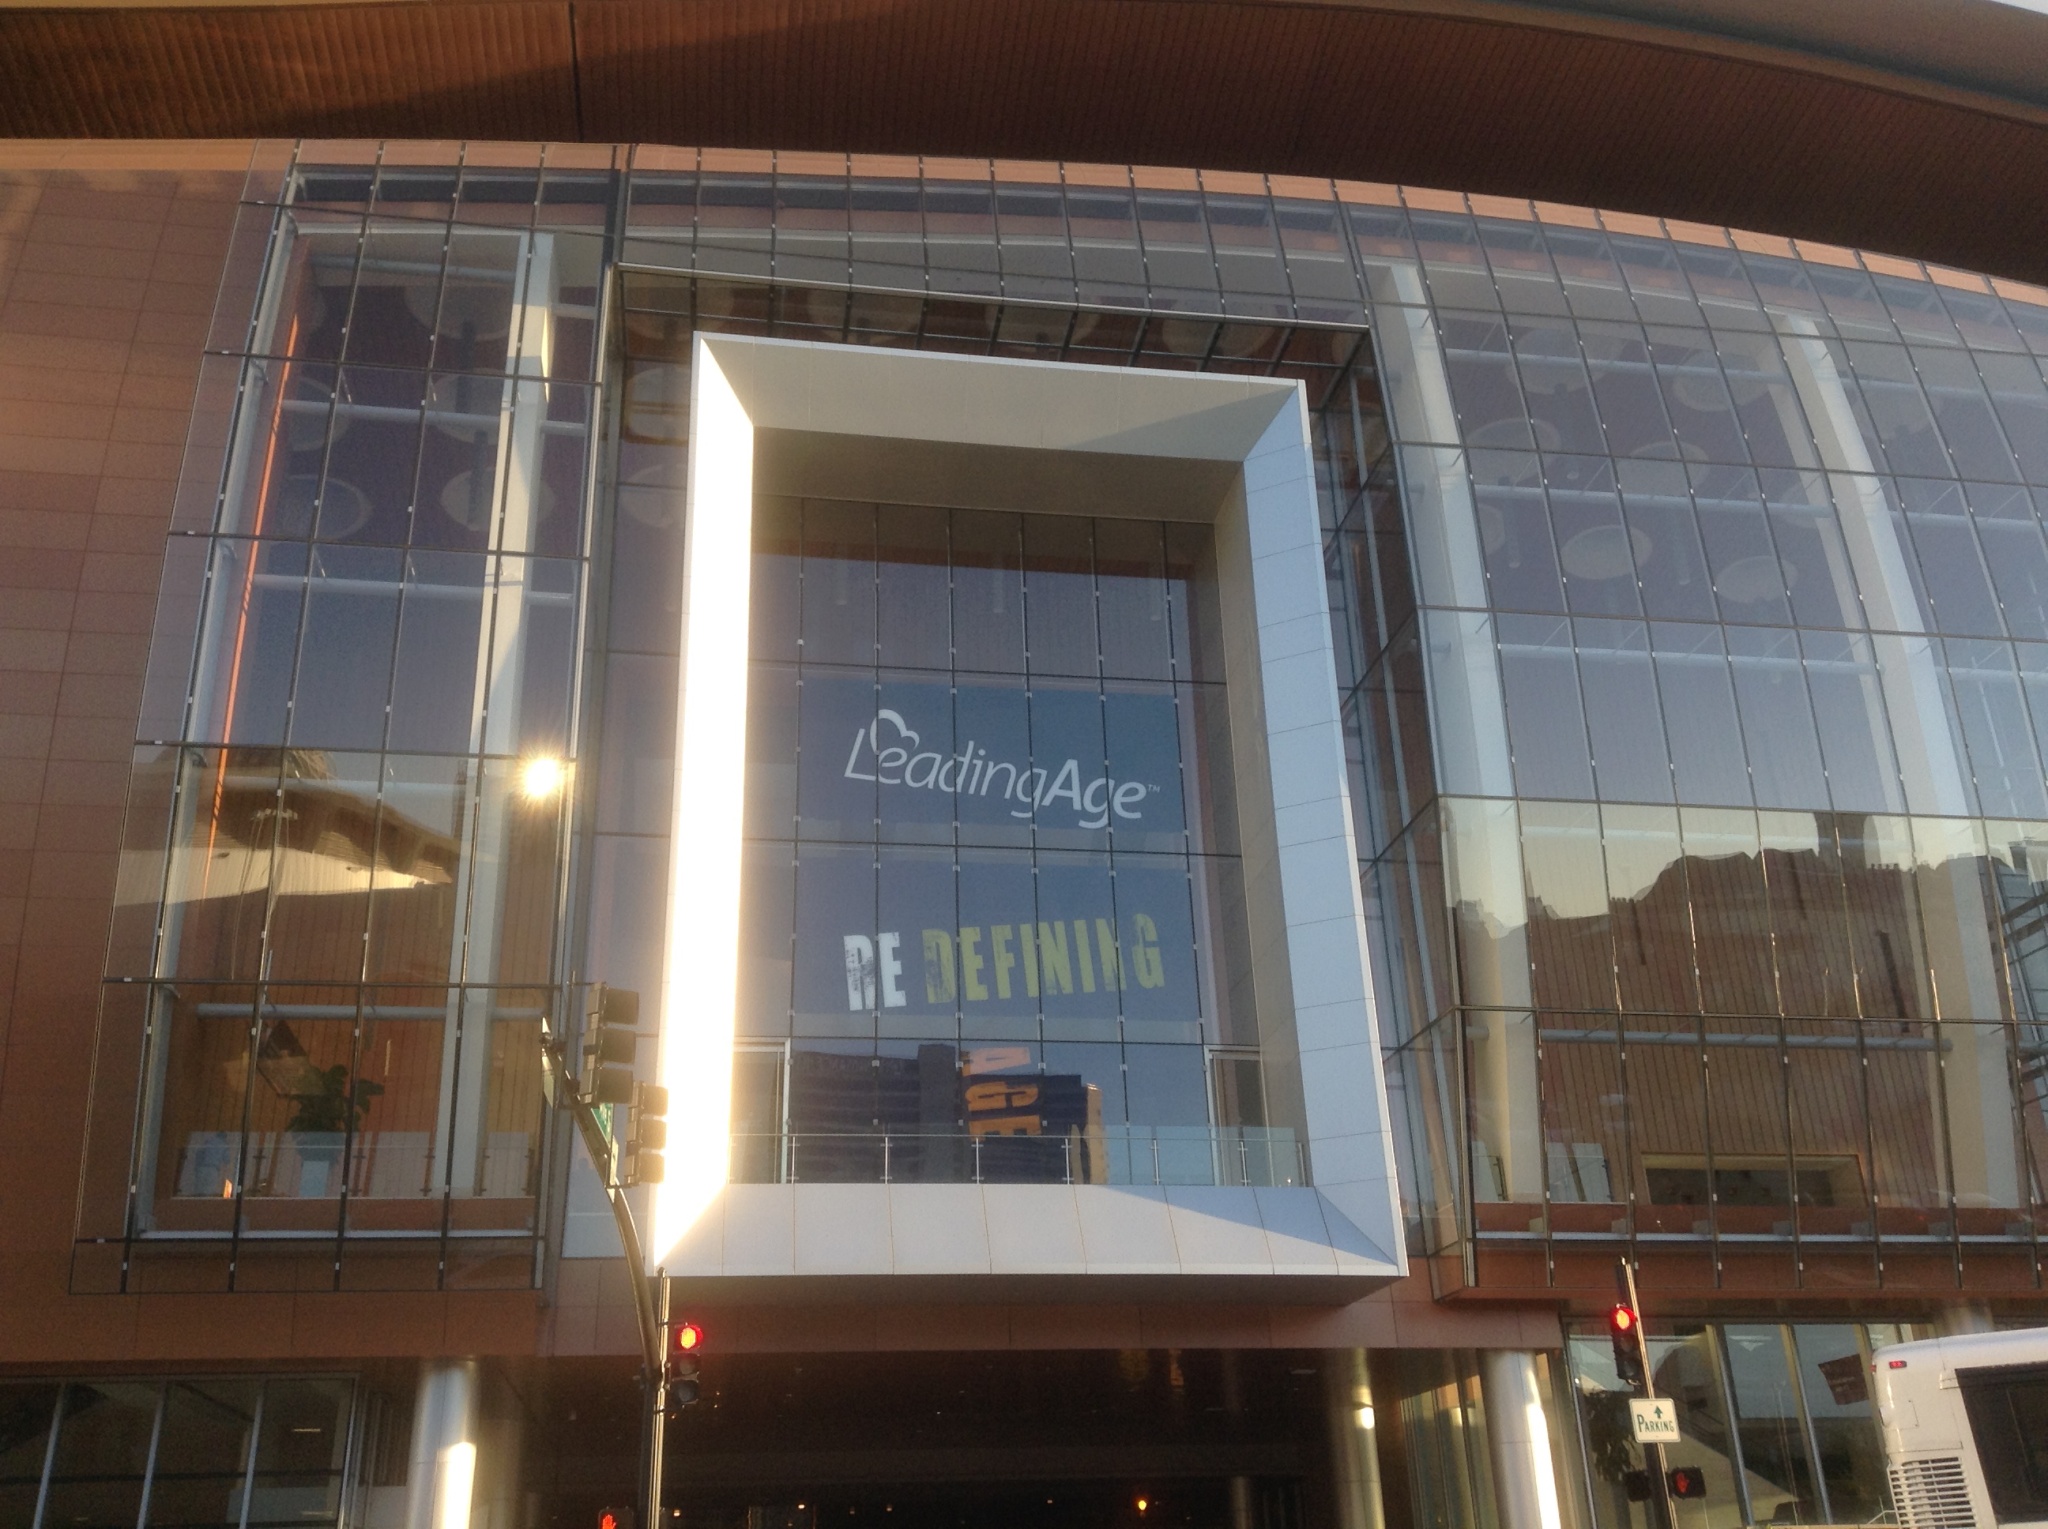 The annual LeadingAge conference is being held at the Music City Center in Nashville.